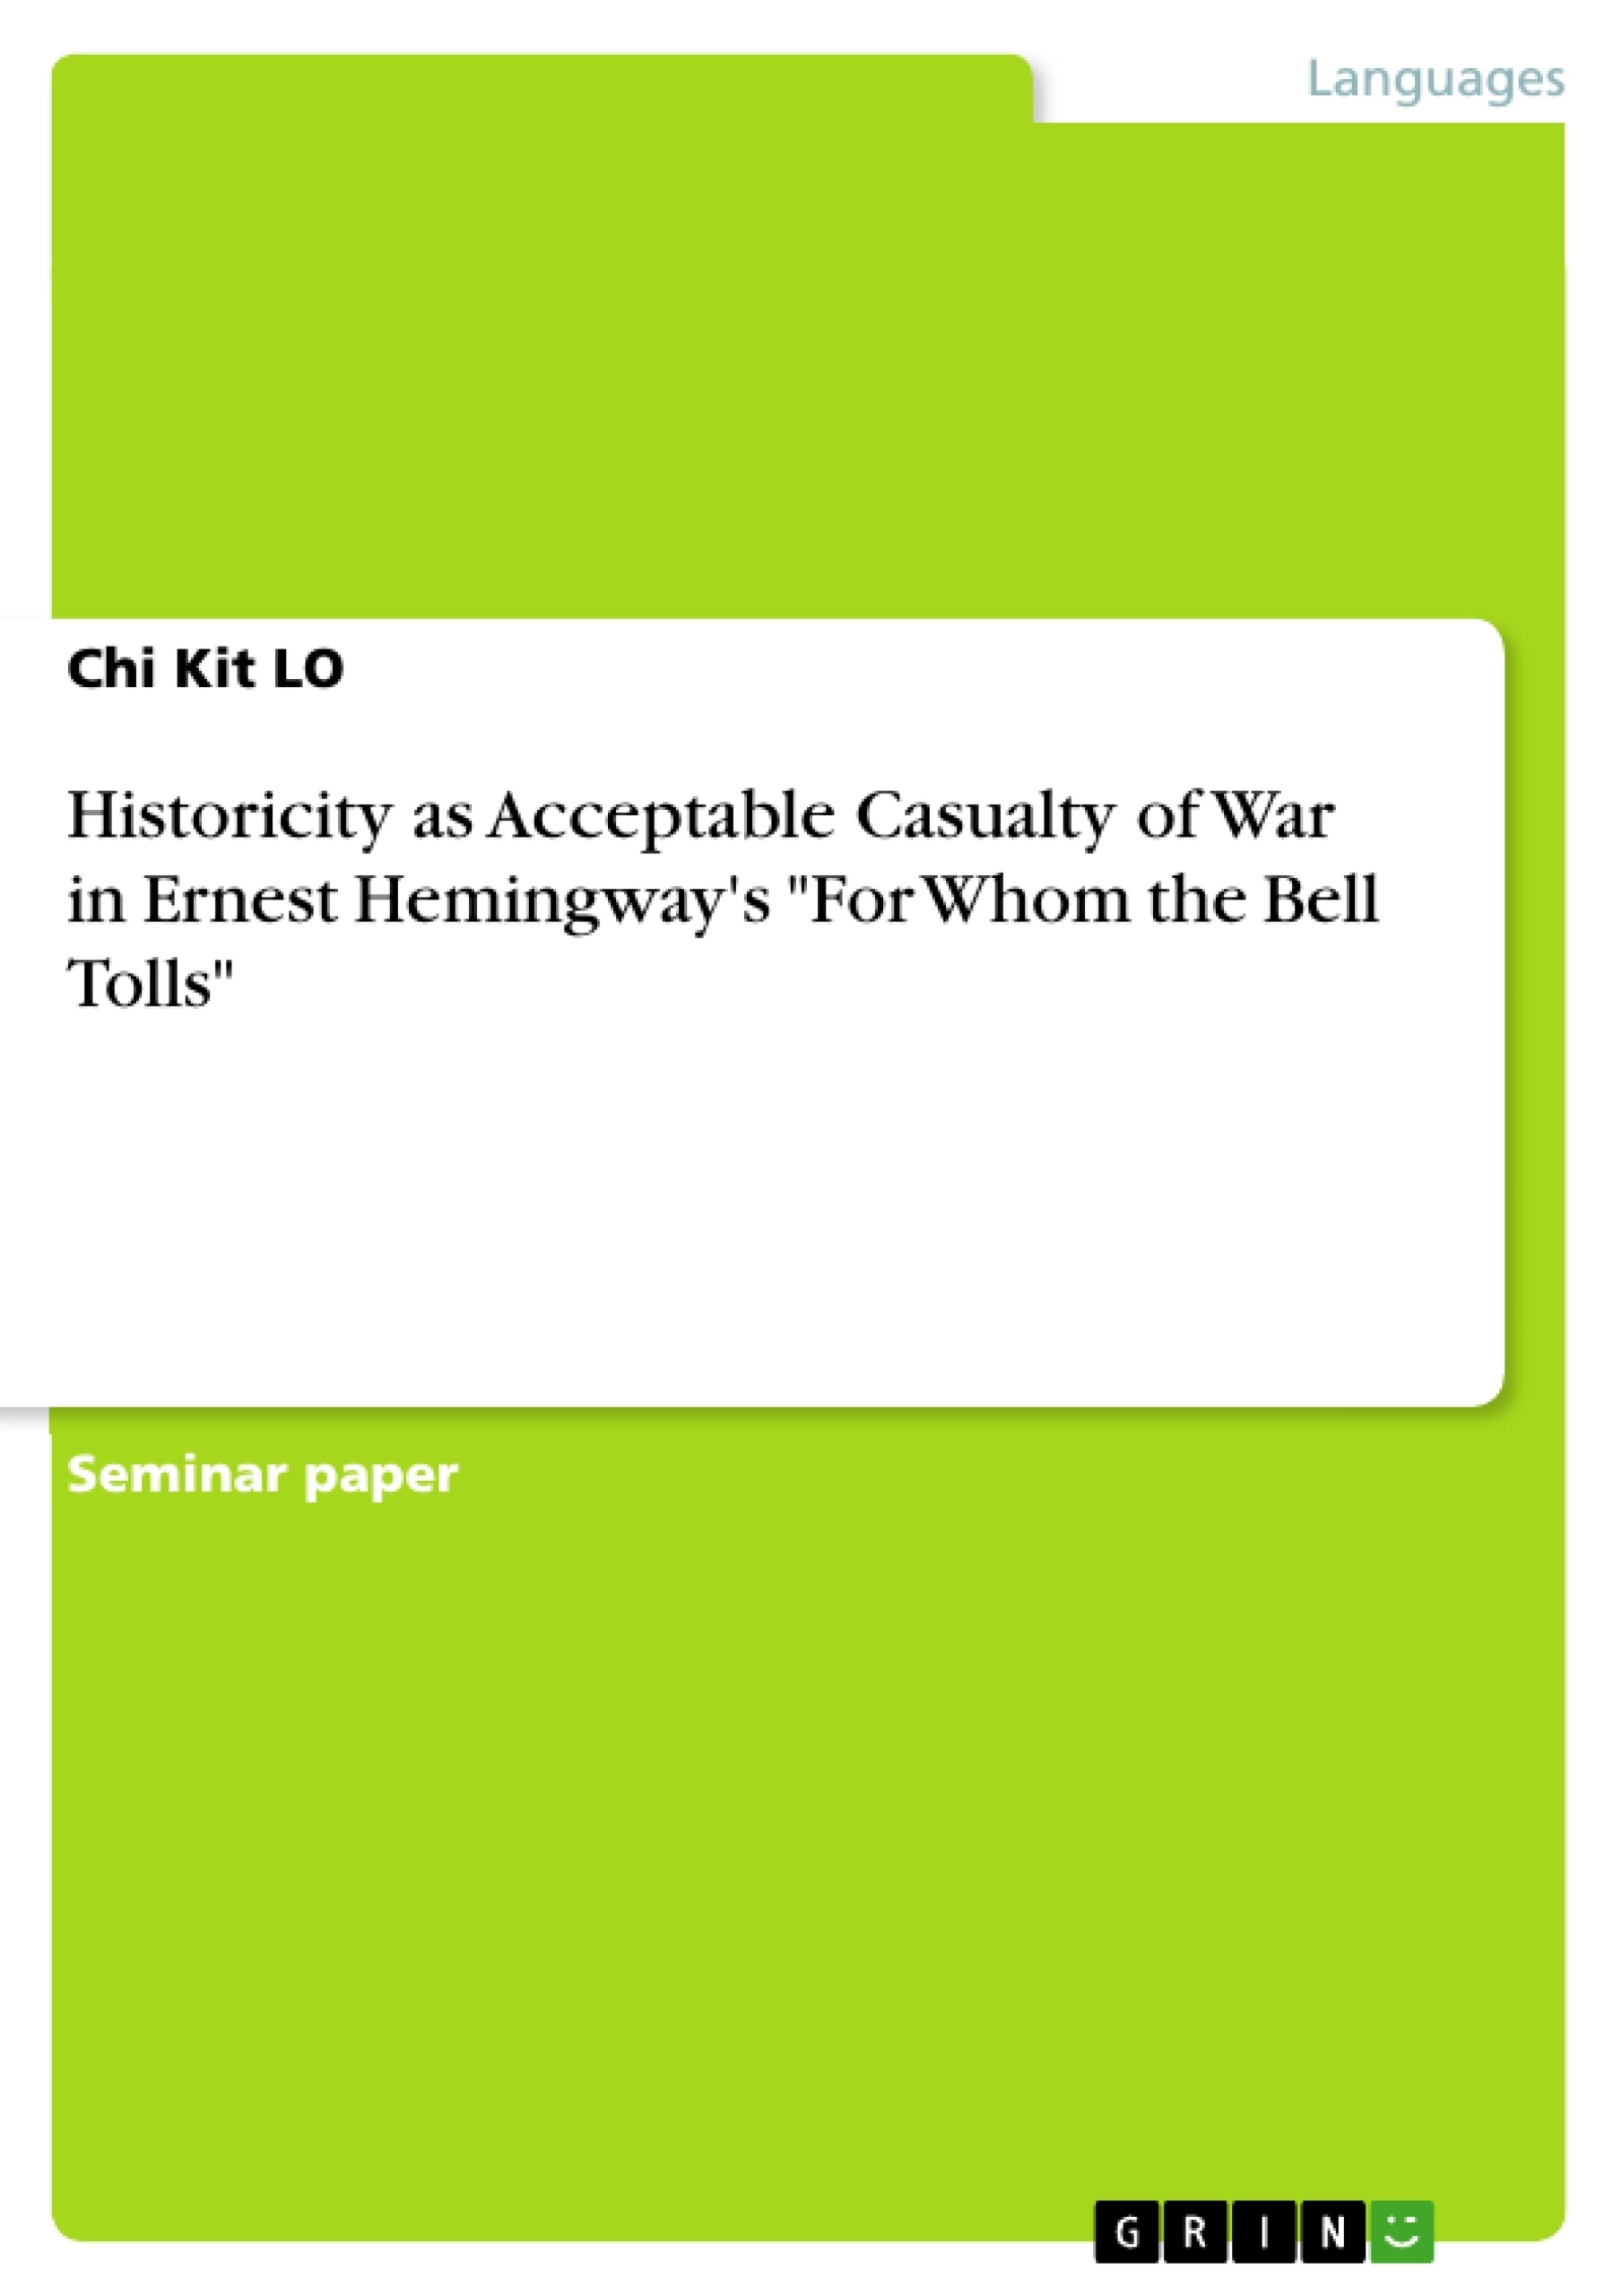 Title: Historicity as Acceptable Casualty of War in Ernest Hemingway's "For Whom the Bell Tolls"